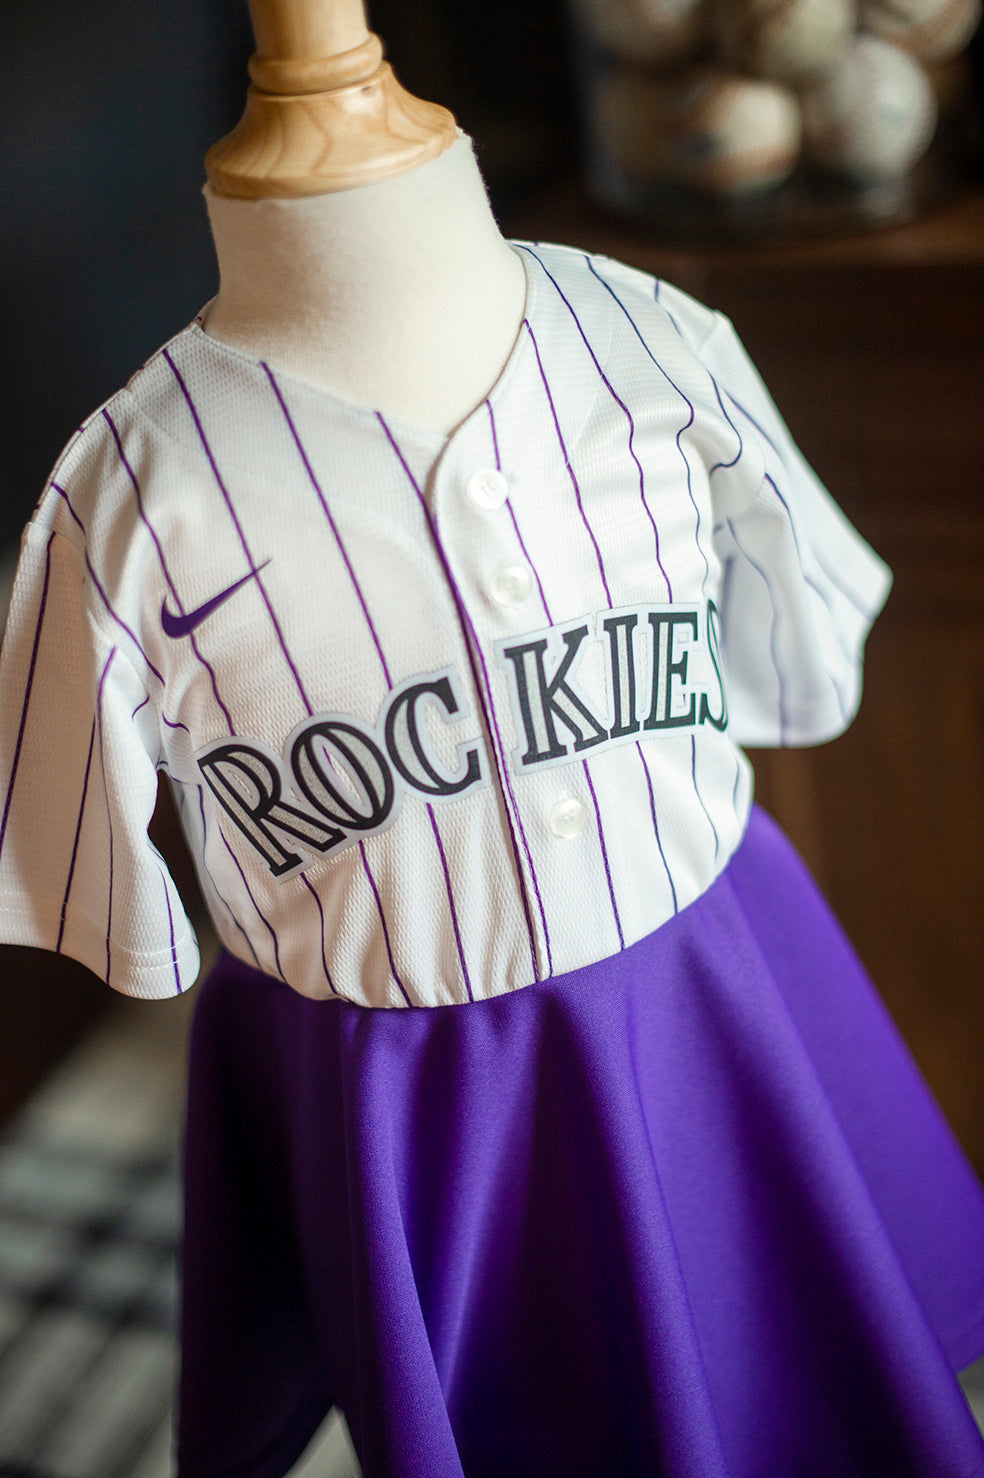 Colorado Rockies Youth Baseball Jersey - Youth Size Small Made by